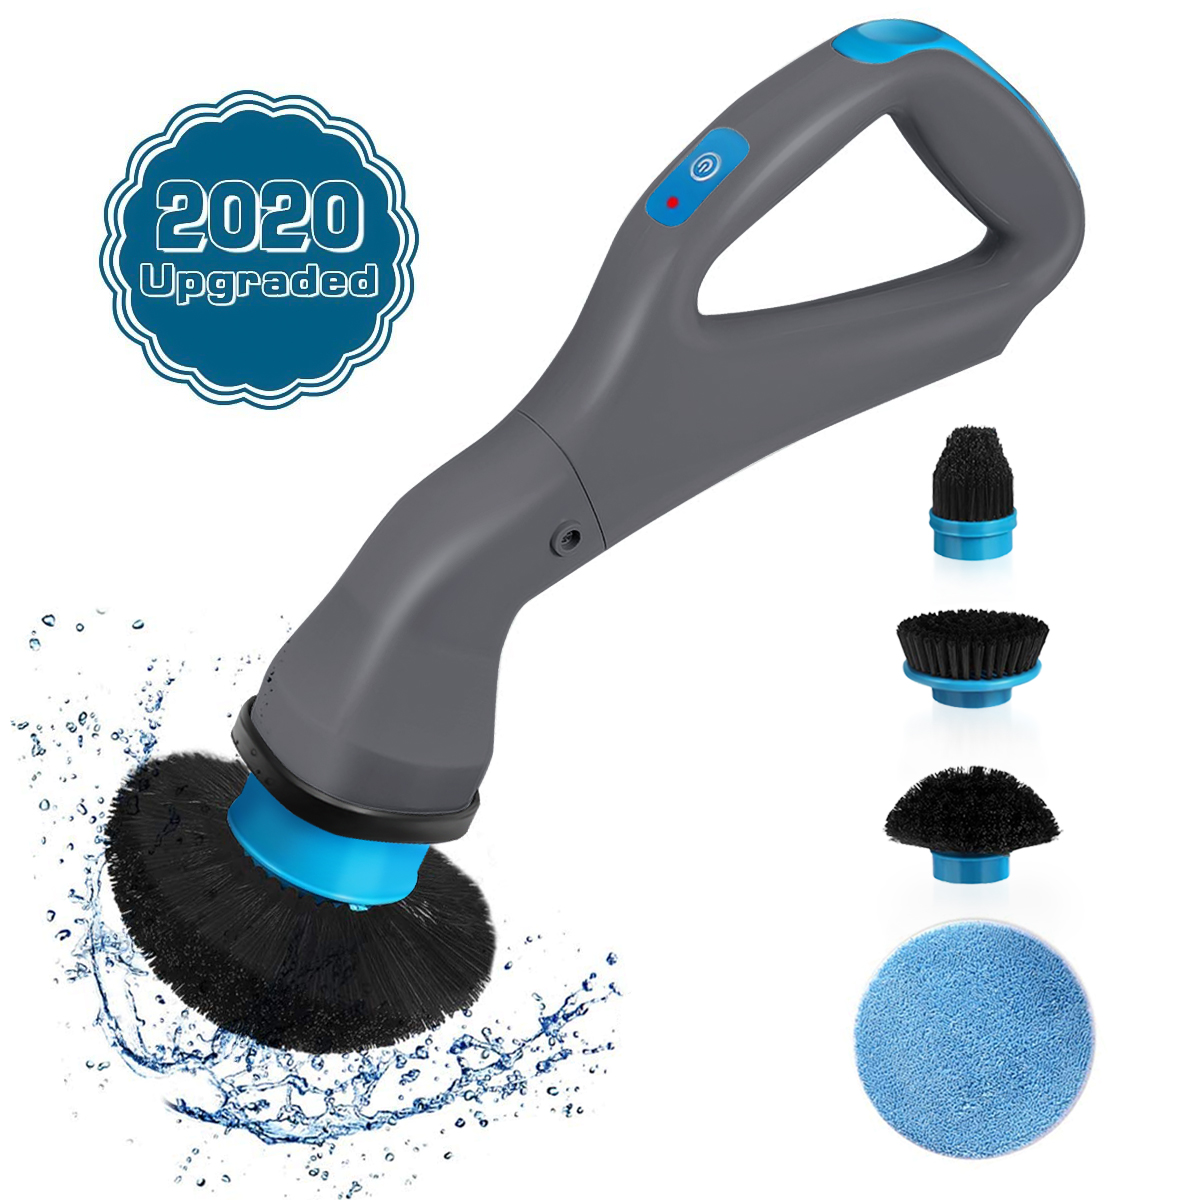 All-in-1-Muscle-Electrical-Cleaning-Brush-Scrubber-Cordless-Bathroom-Shower-Tile4-Heads-1768759-2